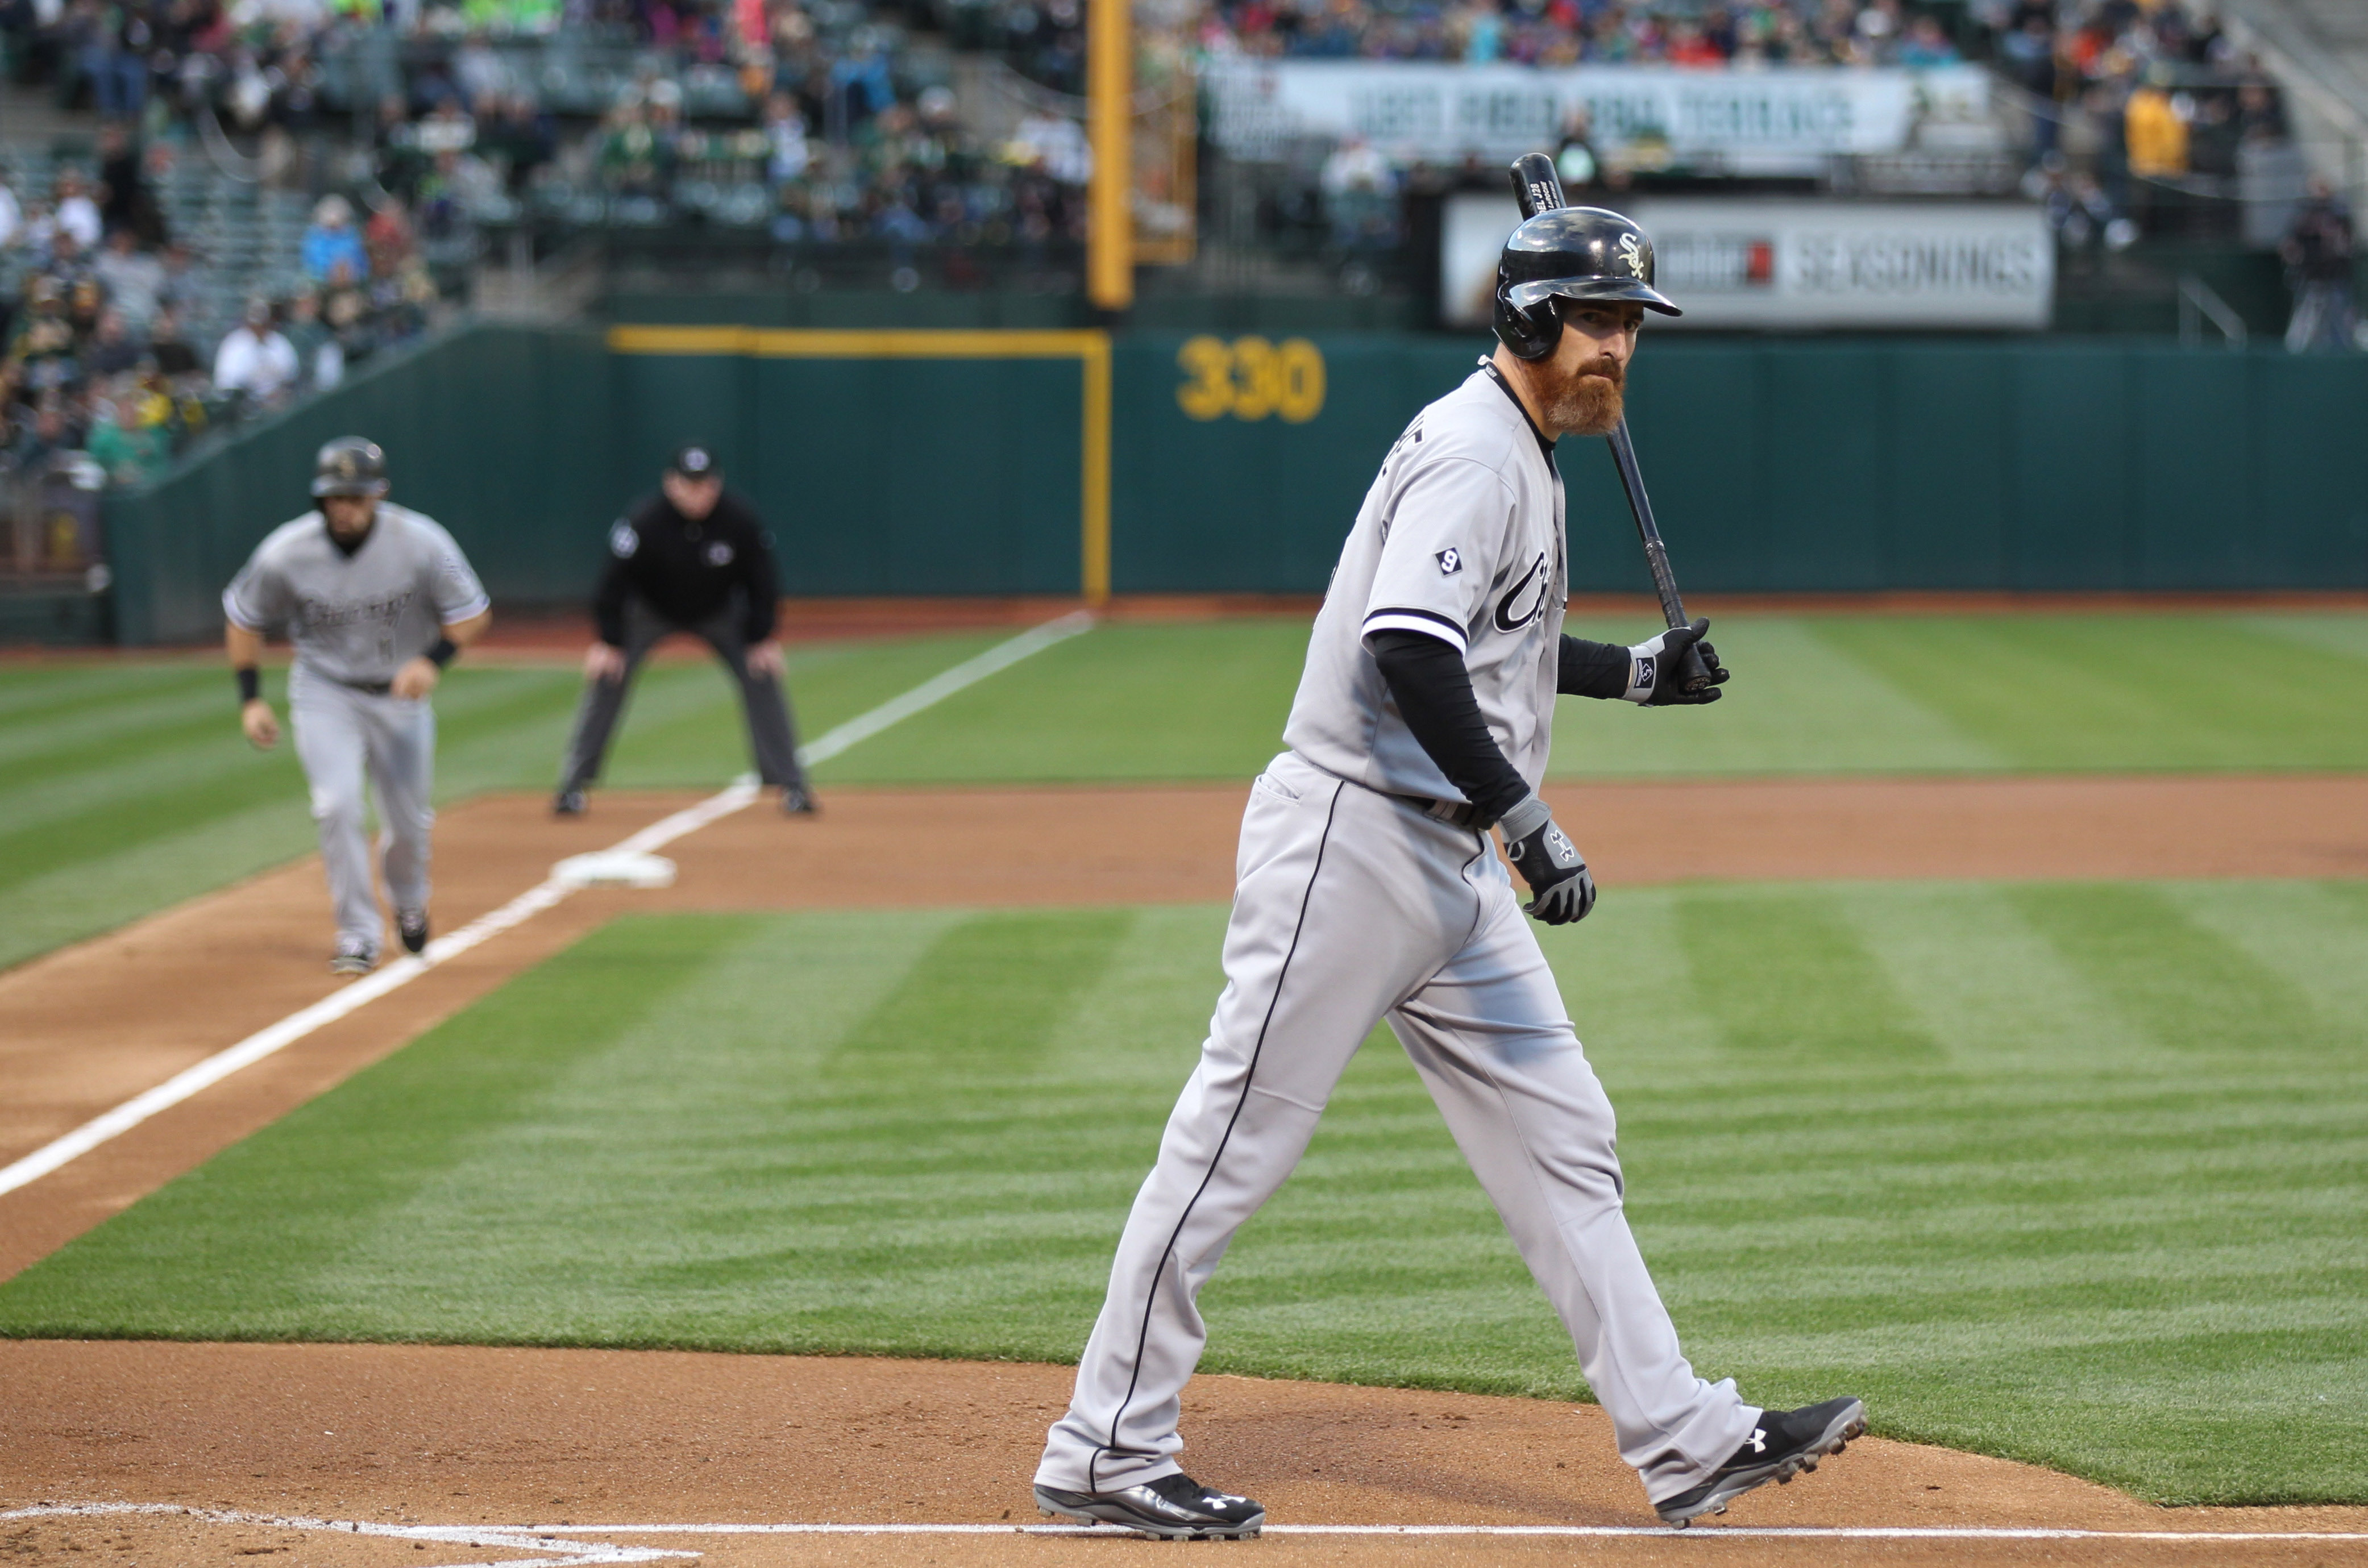 May 15, 2015; Oakland, CA, USA; Chicago White Sox designated hitter Adam LaRoche (25) earns a walk with bases loaded t send in Chicago White Sox center fielder Adam Eaton (1) for a run against the Oakland Athletics during the first inning at O.co Coliseum. Mandatory Credit: Kelley L Cox-USA TODAY Sports